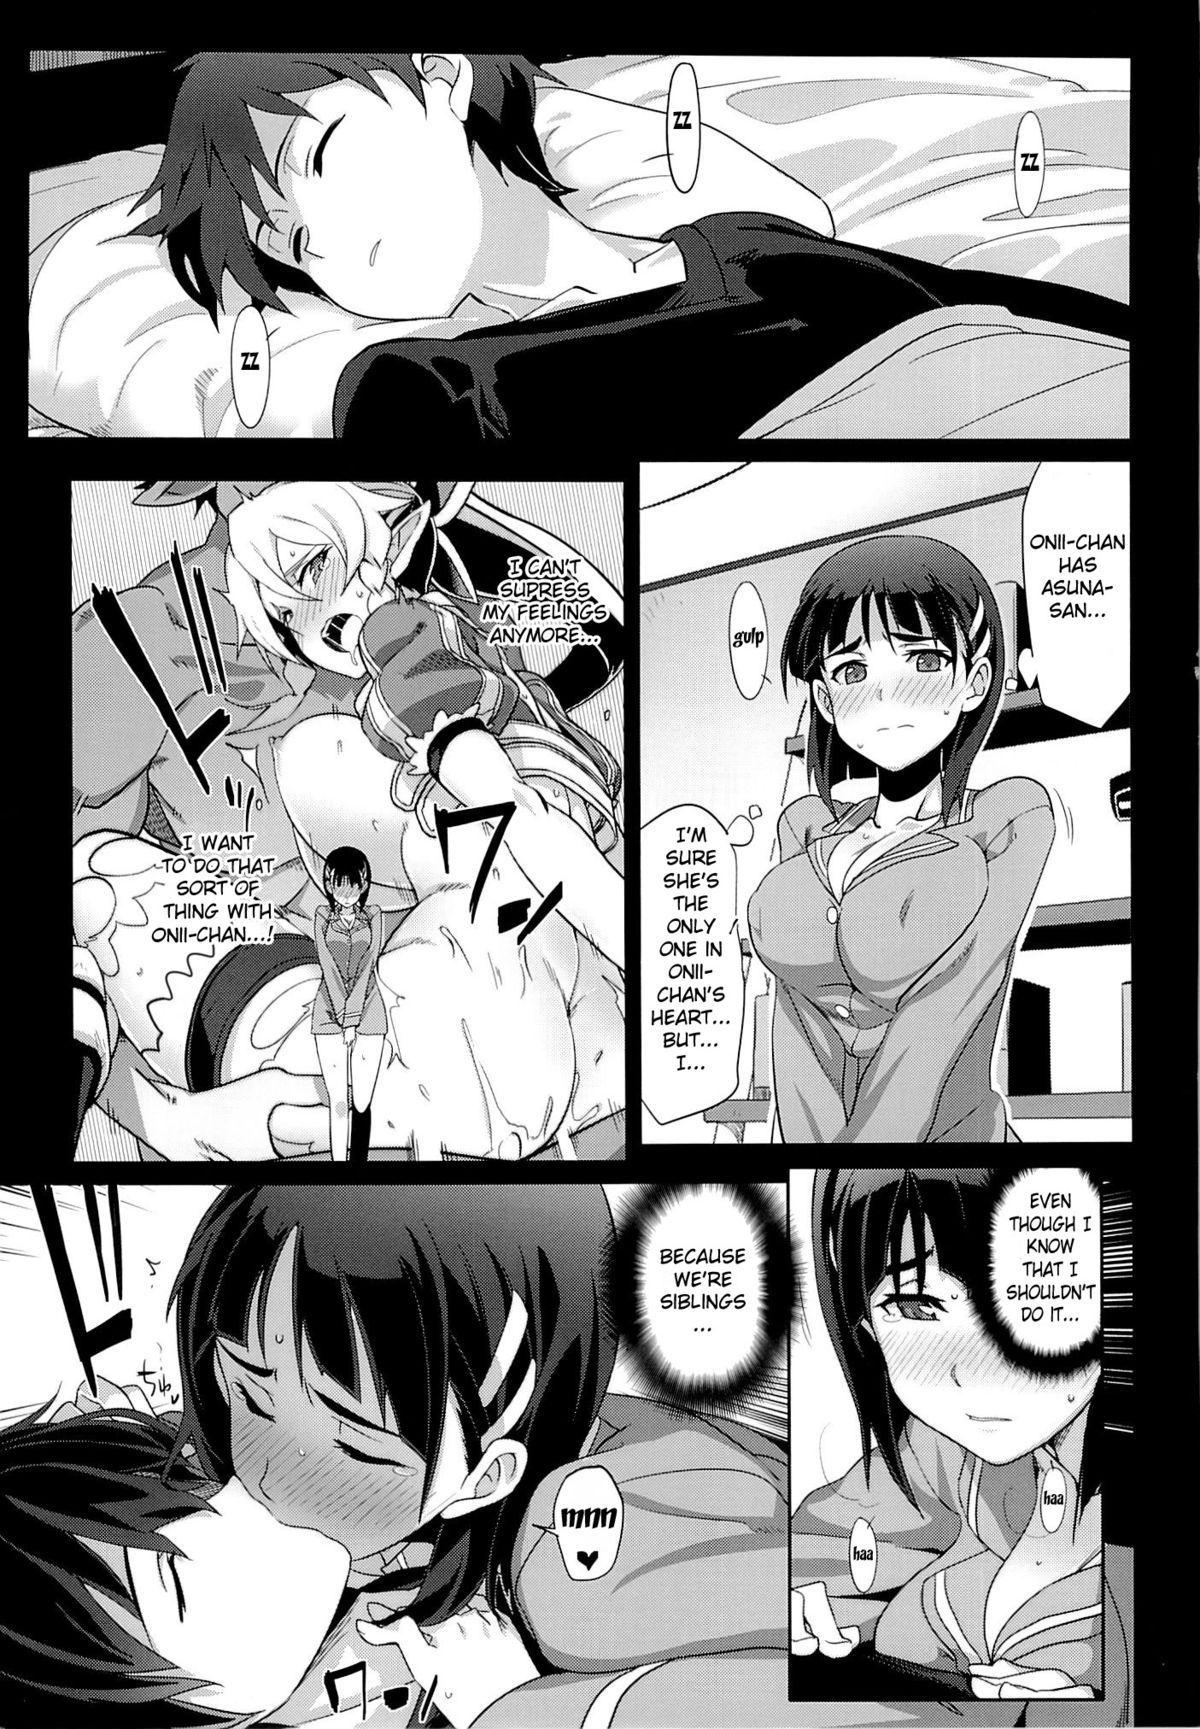 Lady Slave To Your Love - Sword art online Atm - Page 9